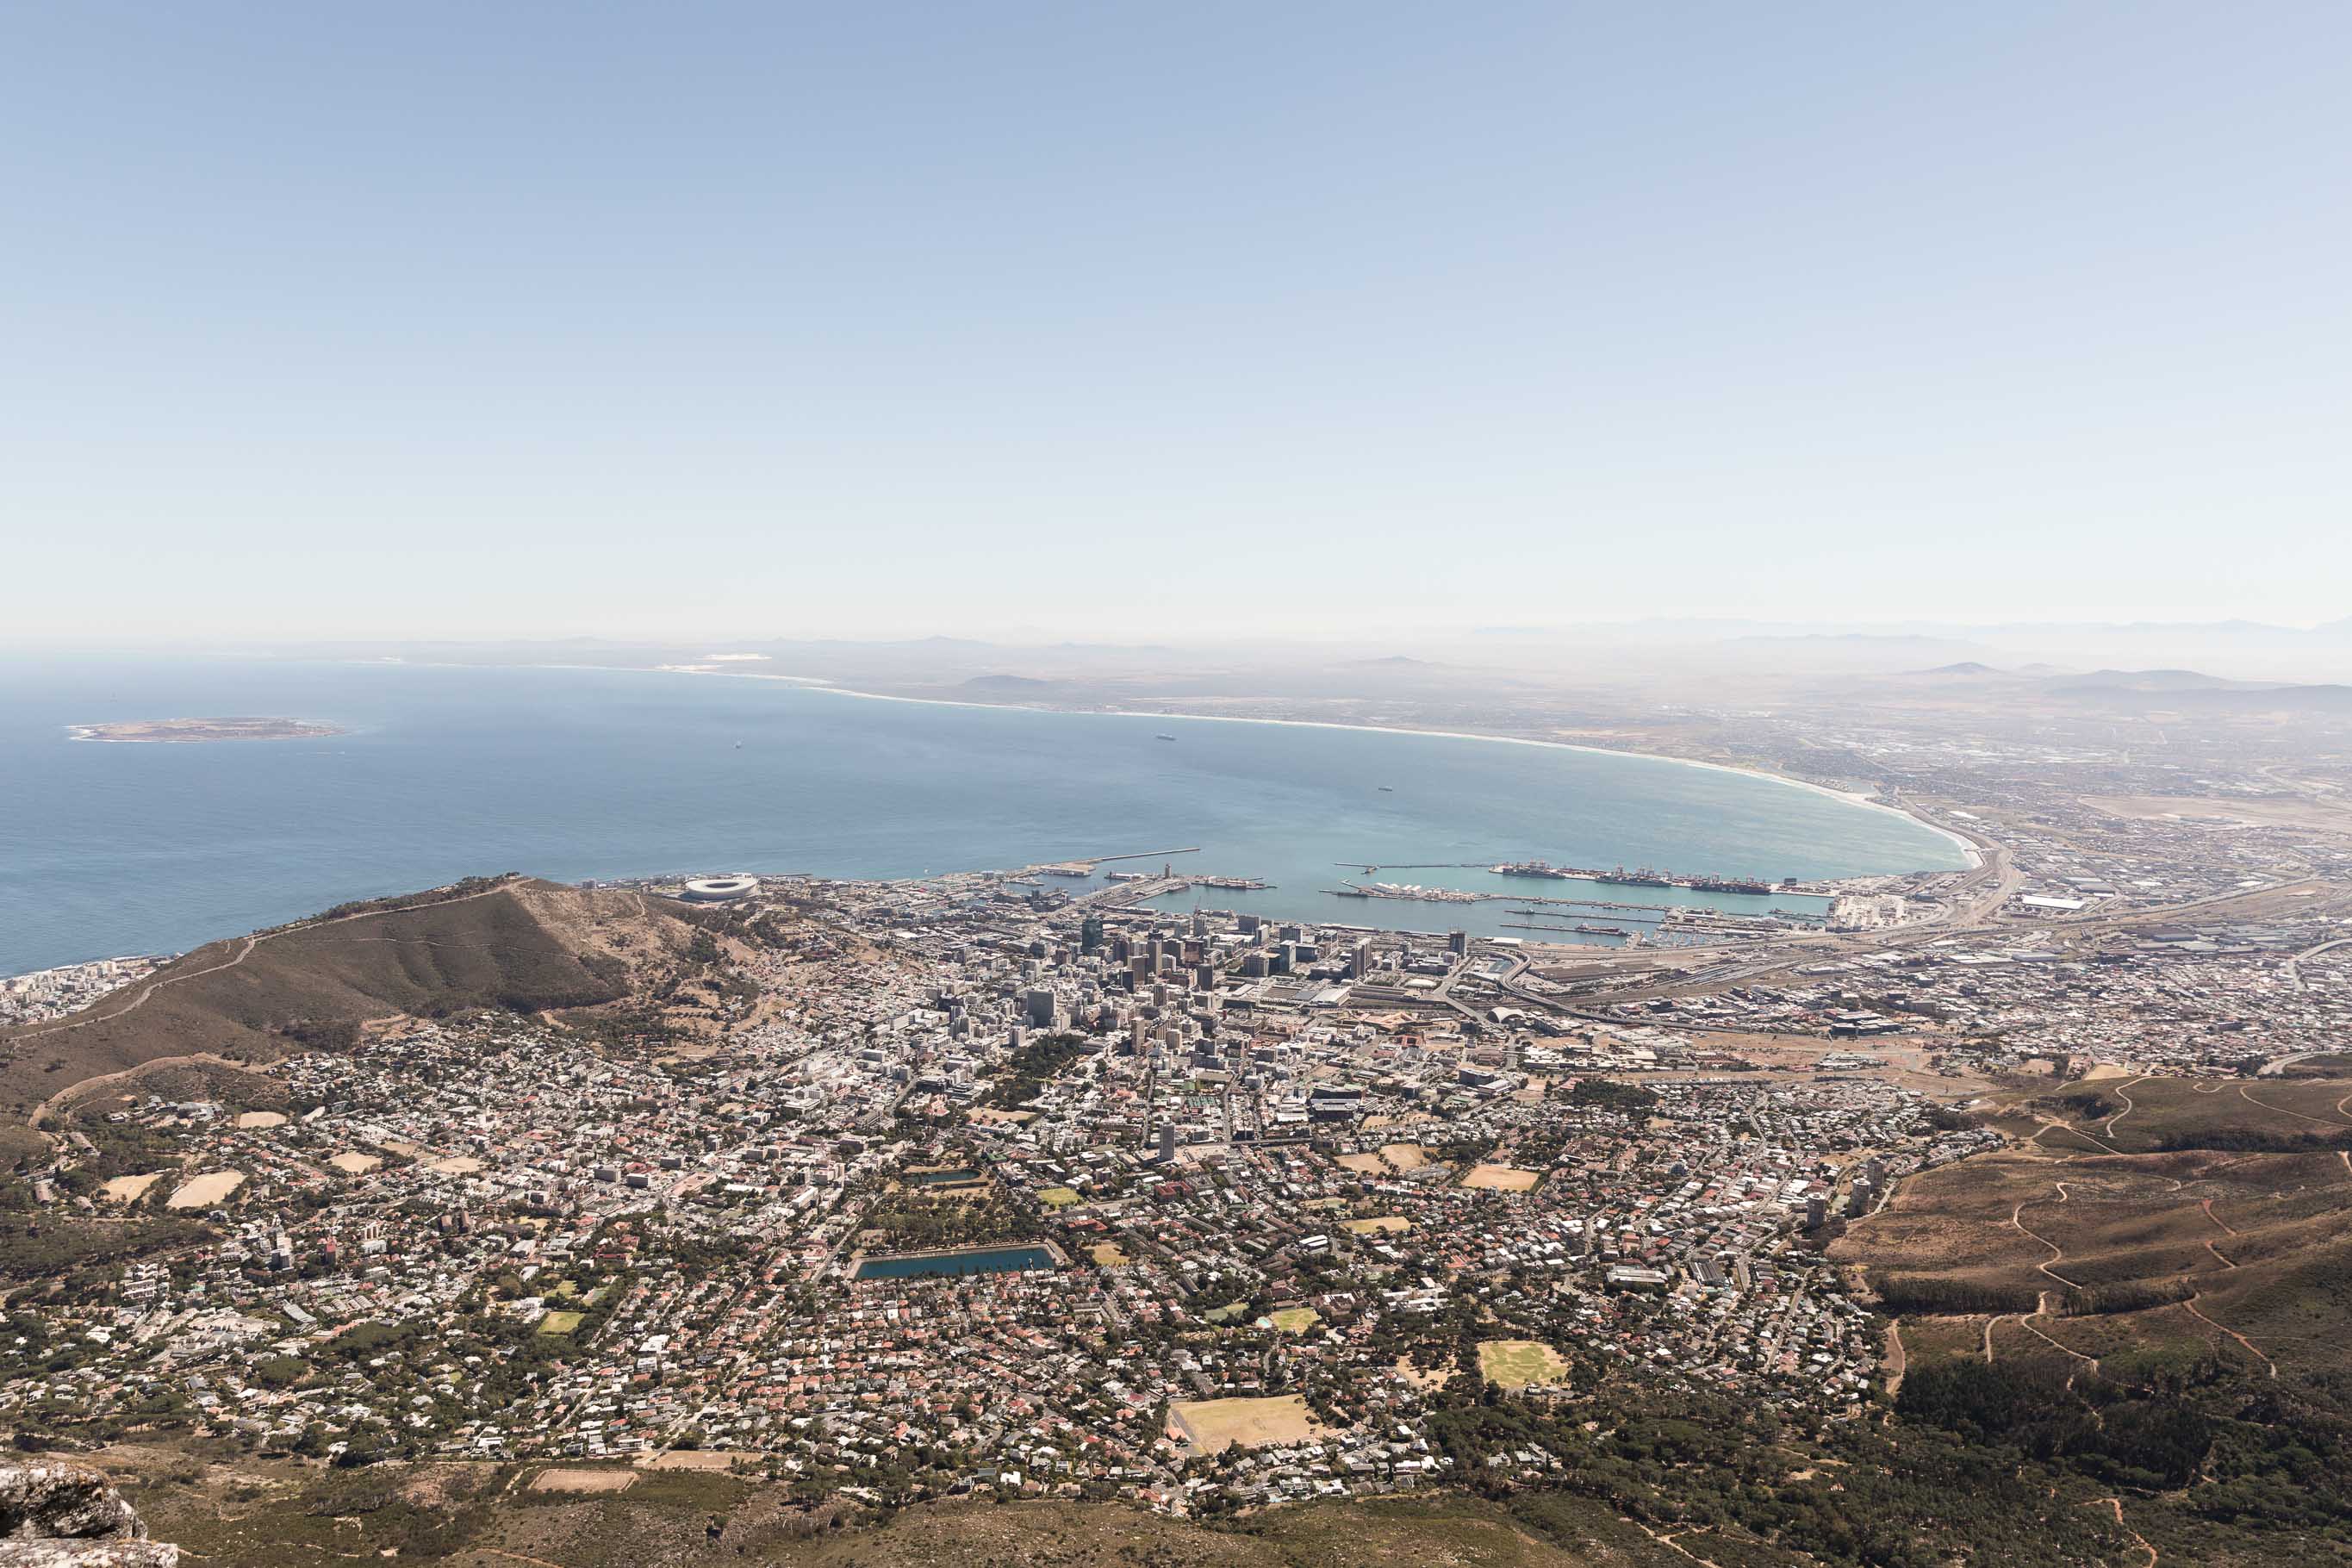 Cape Town: 2 Locals talk about the Water Crisis